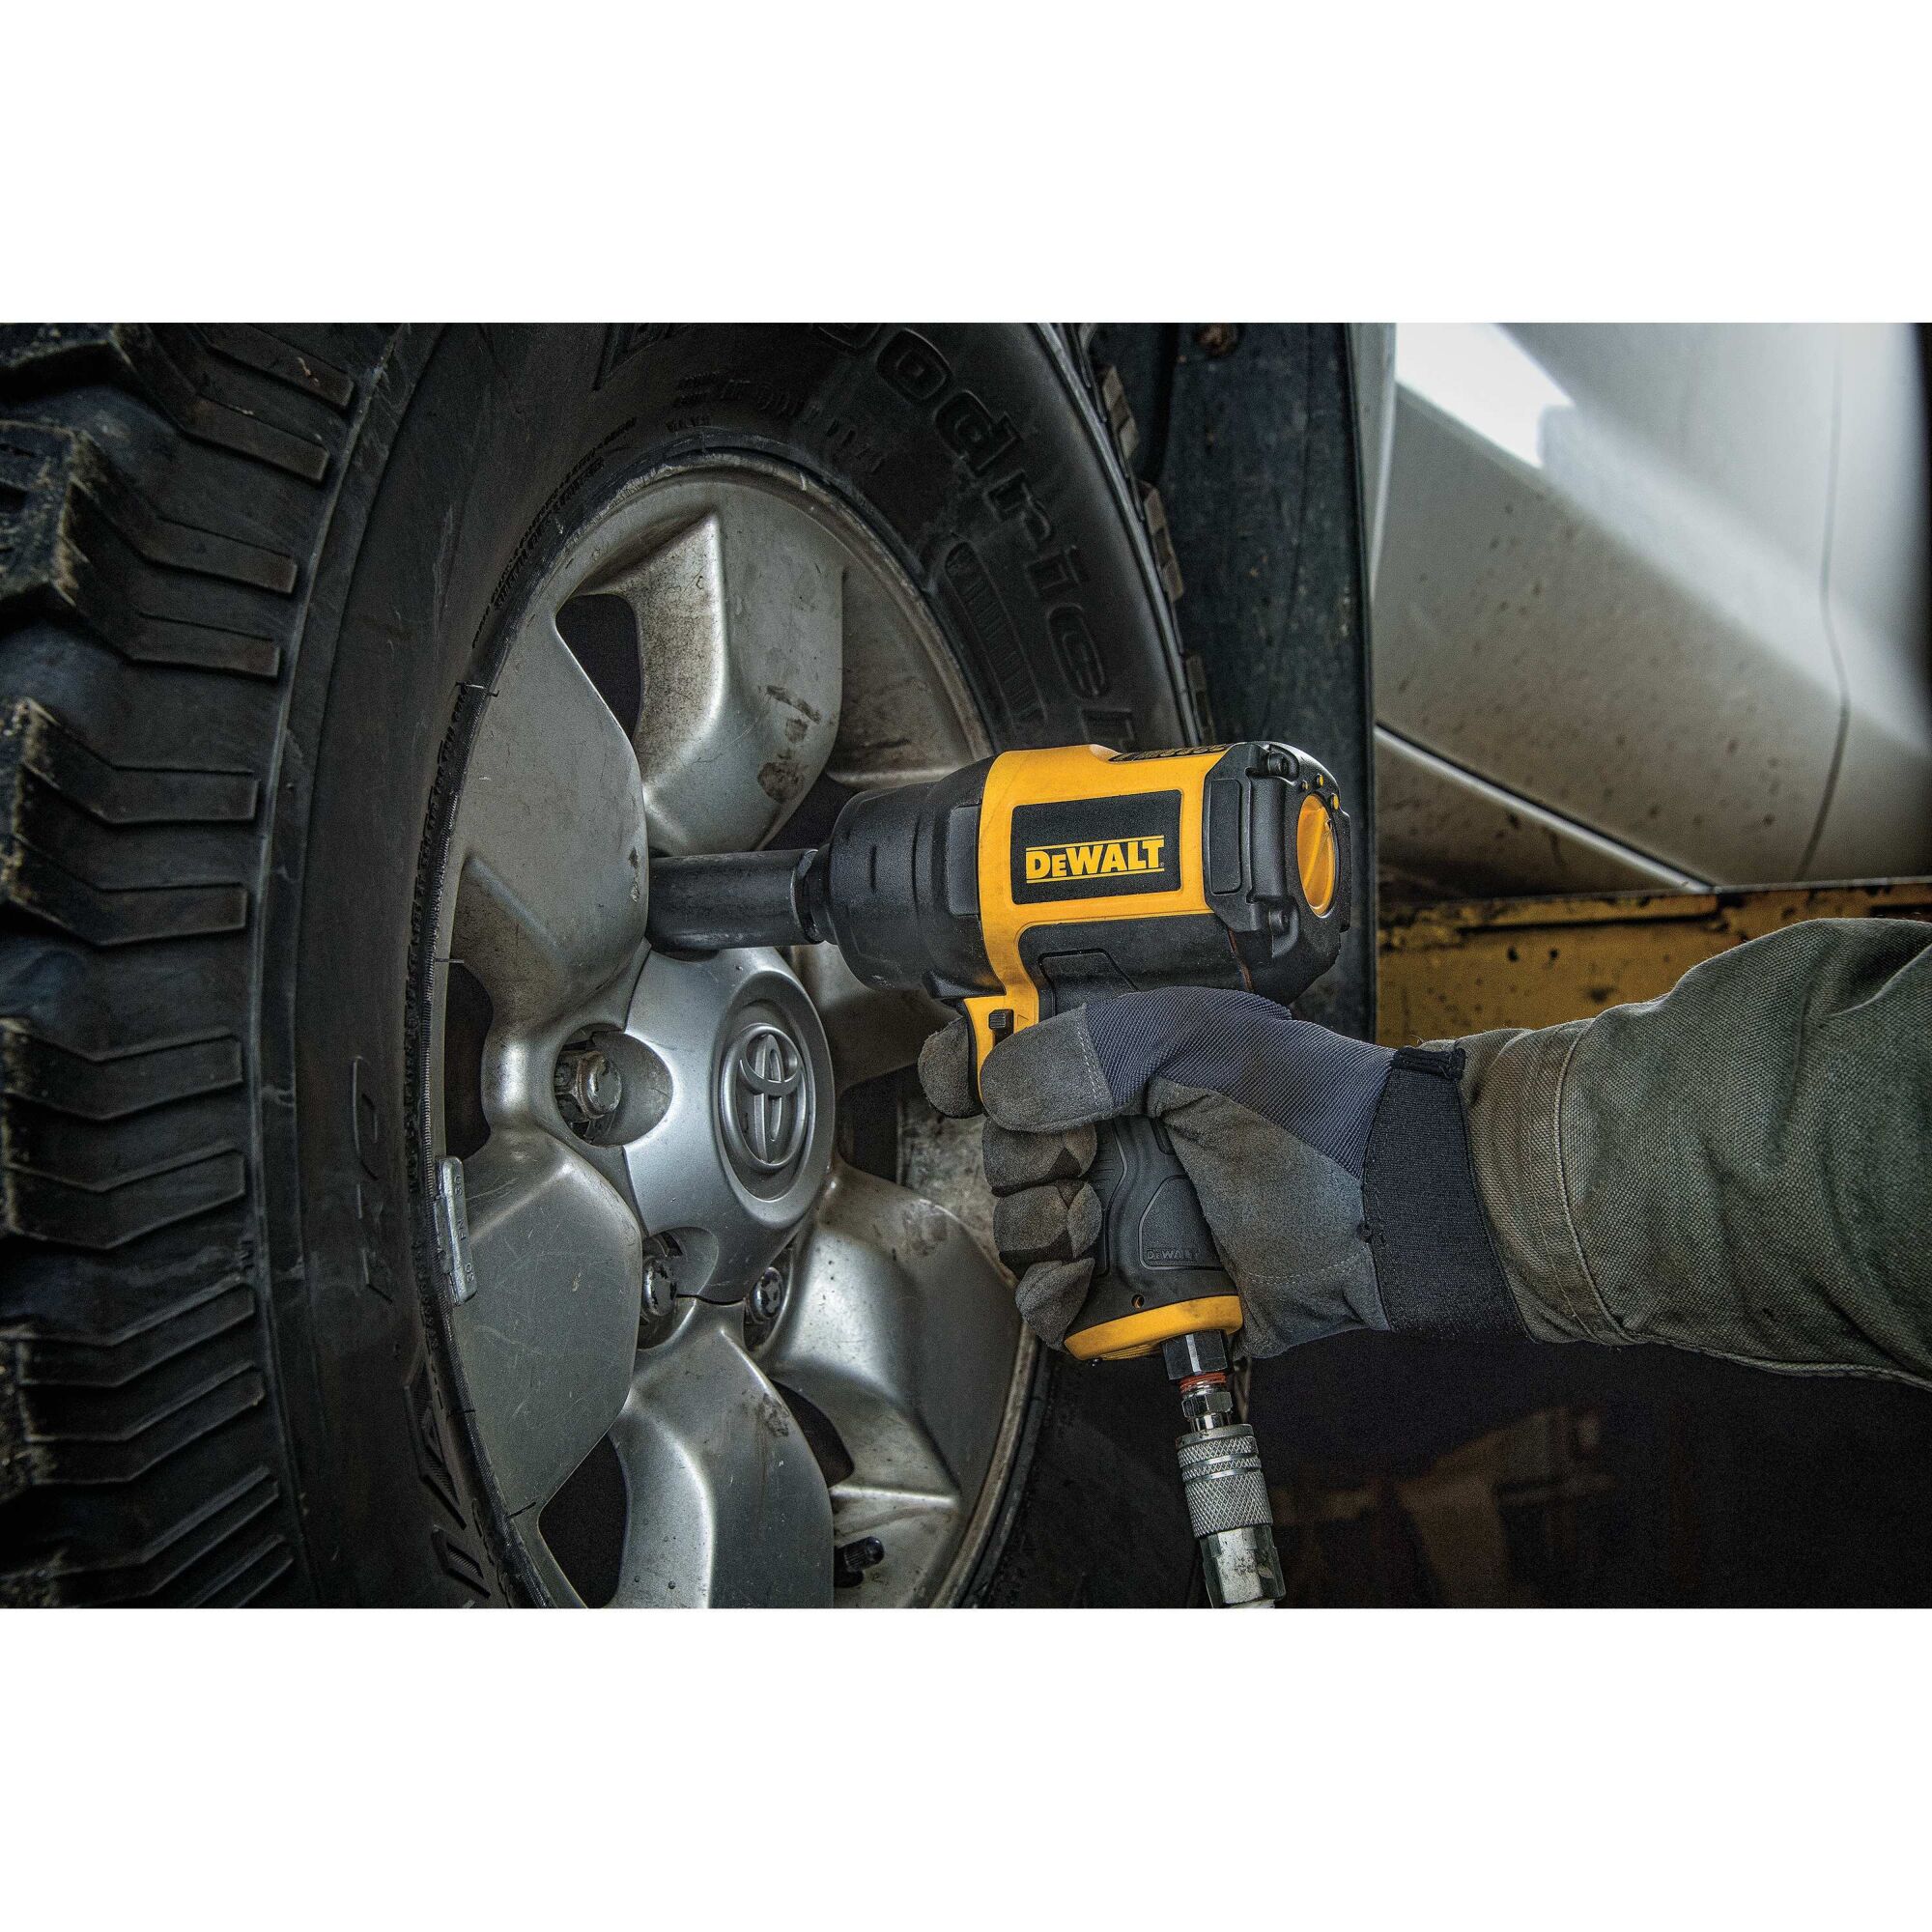 DEWALT half inch heavy duty drive impact wrench being used by a person.